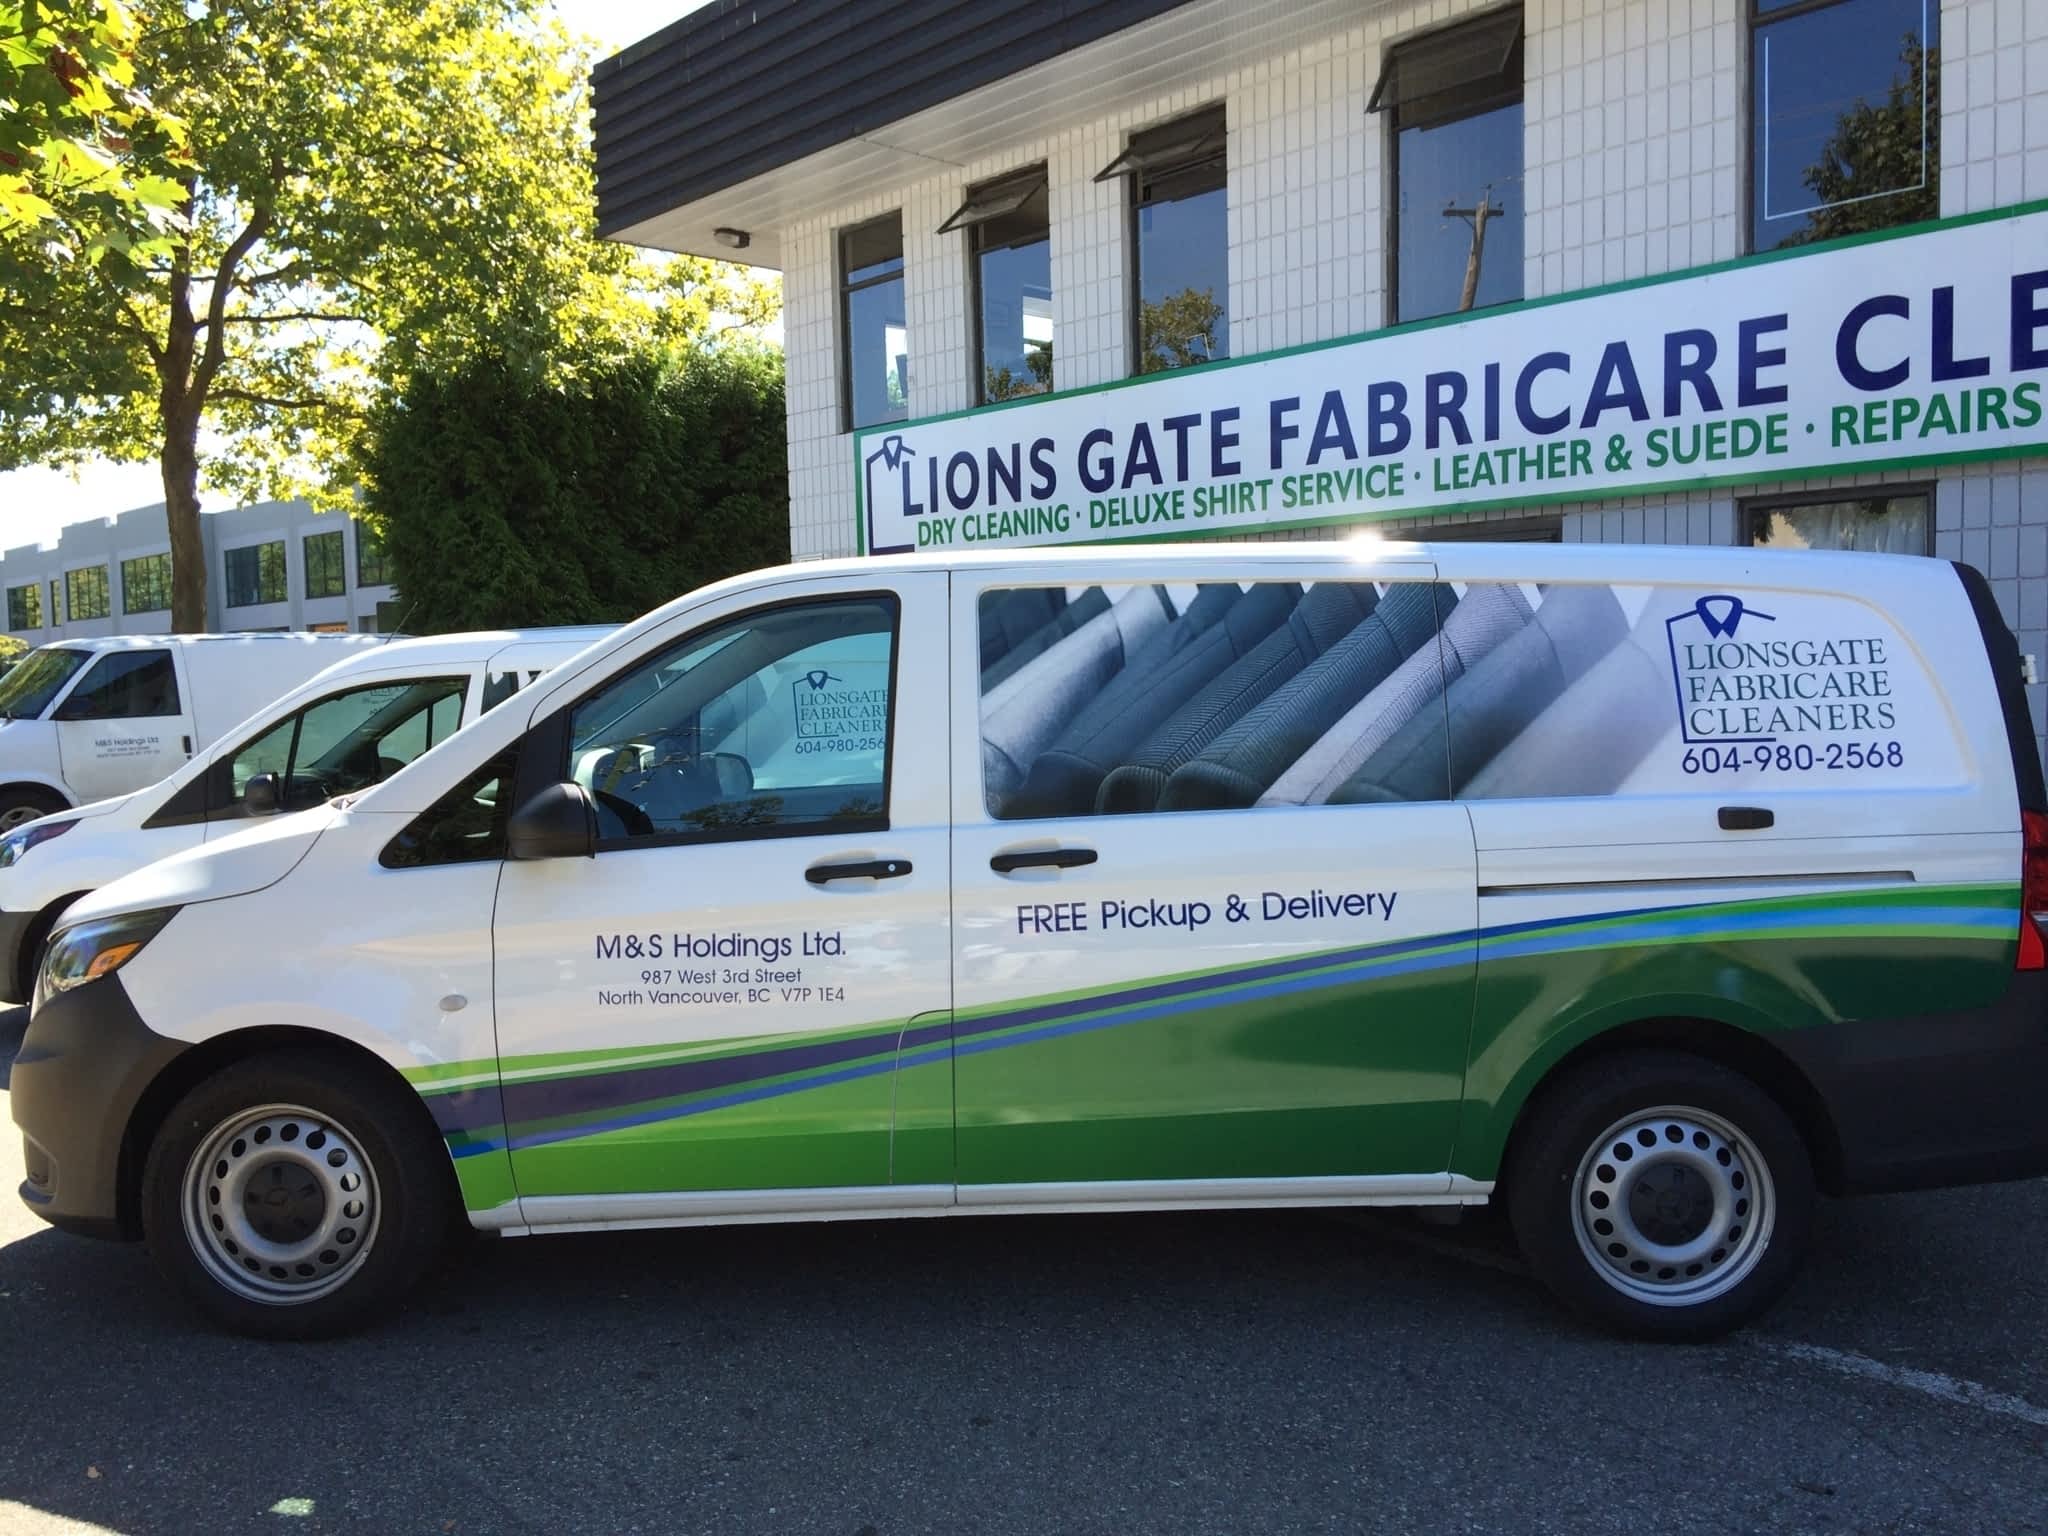 photo Lions Gate Fabricare Cleaners